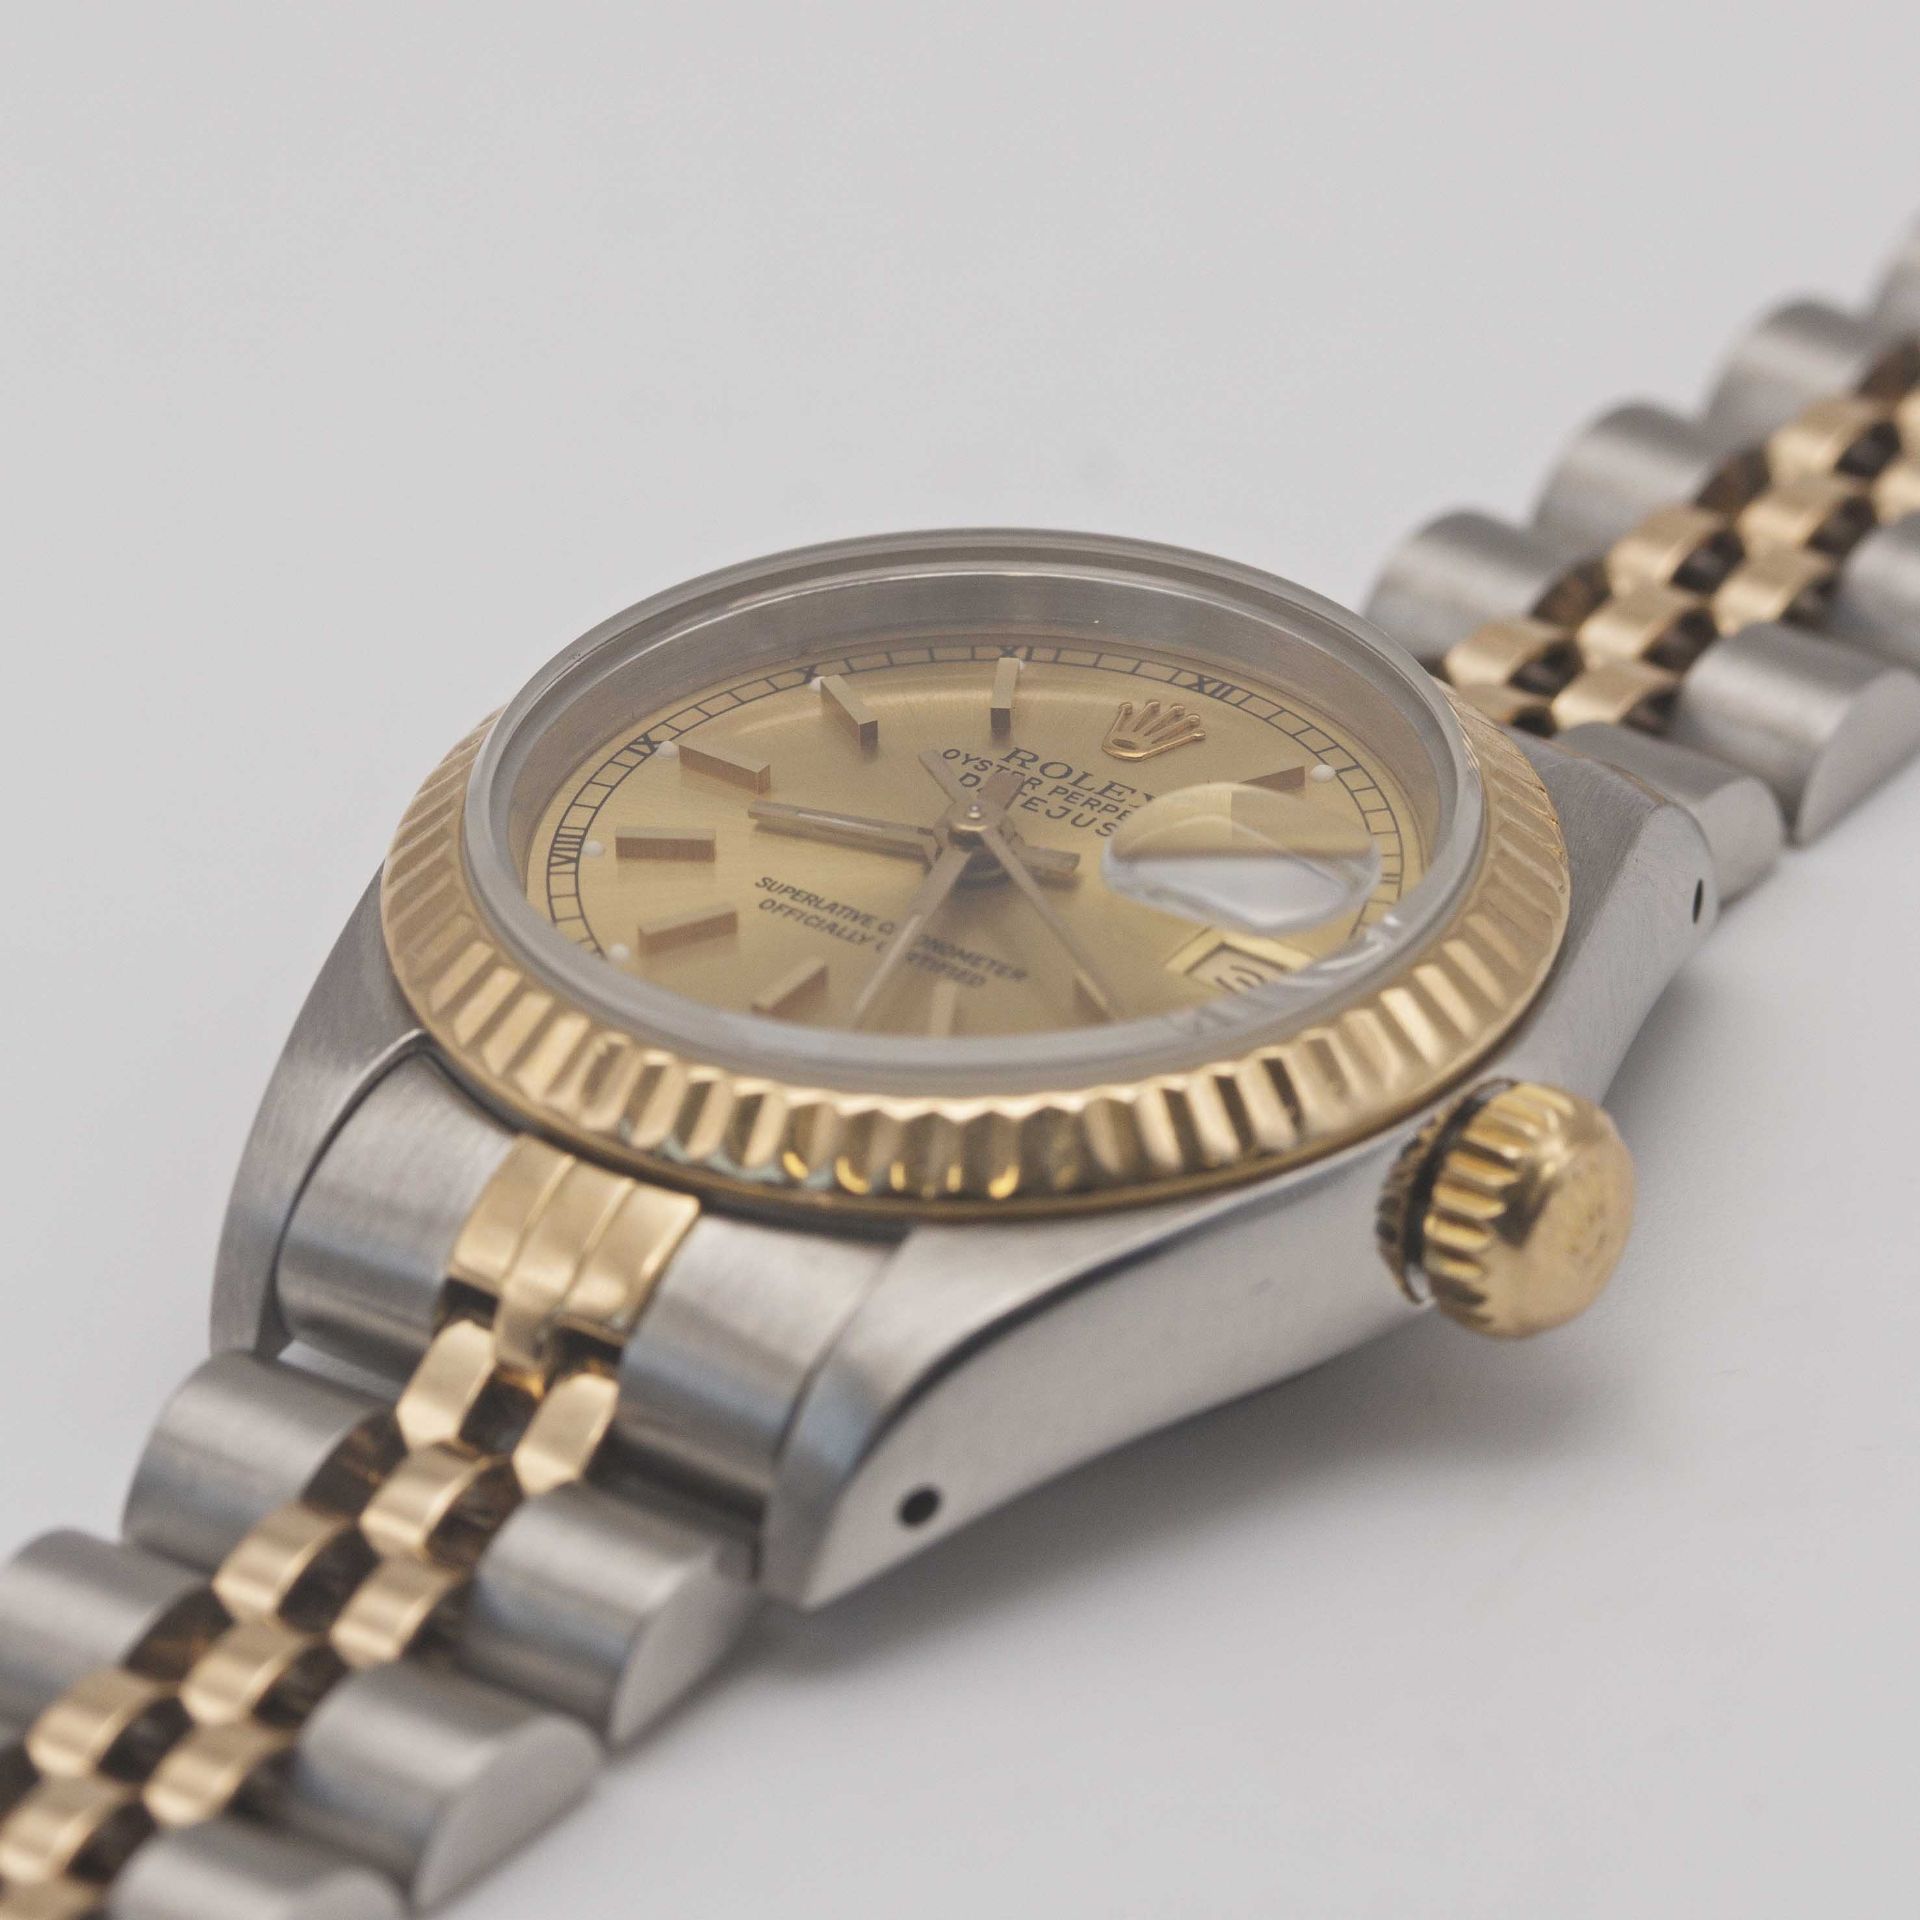 A LADIES STEEL & GOLD ROLEX OYSTER PERPETUAL DATEJUST BRACELET WATCH CIRCA 2000, REF. 69173 WITH - Image 10 of 12